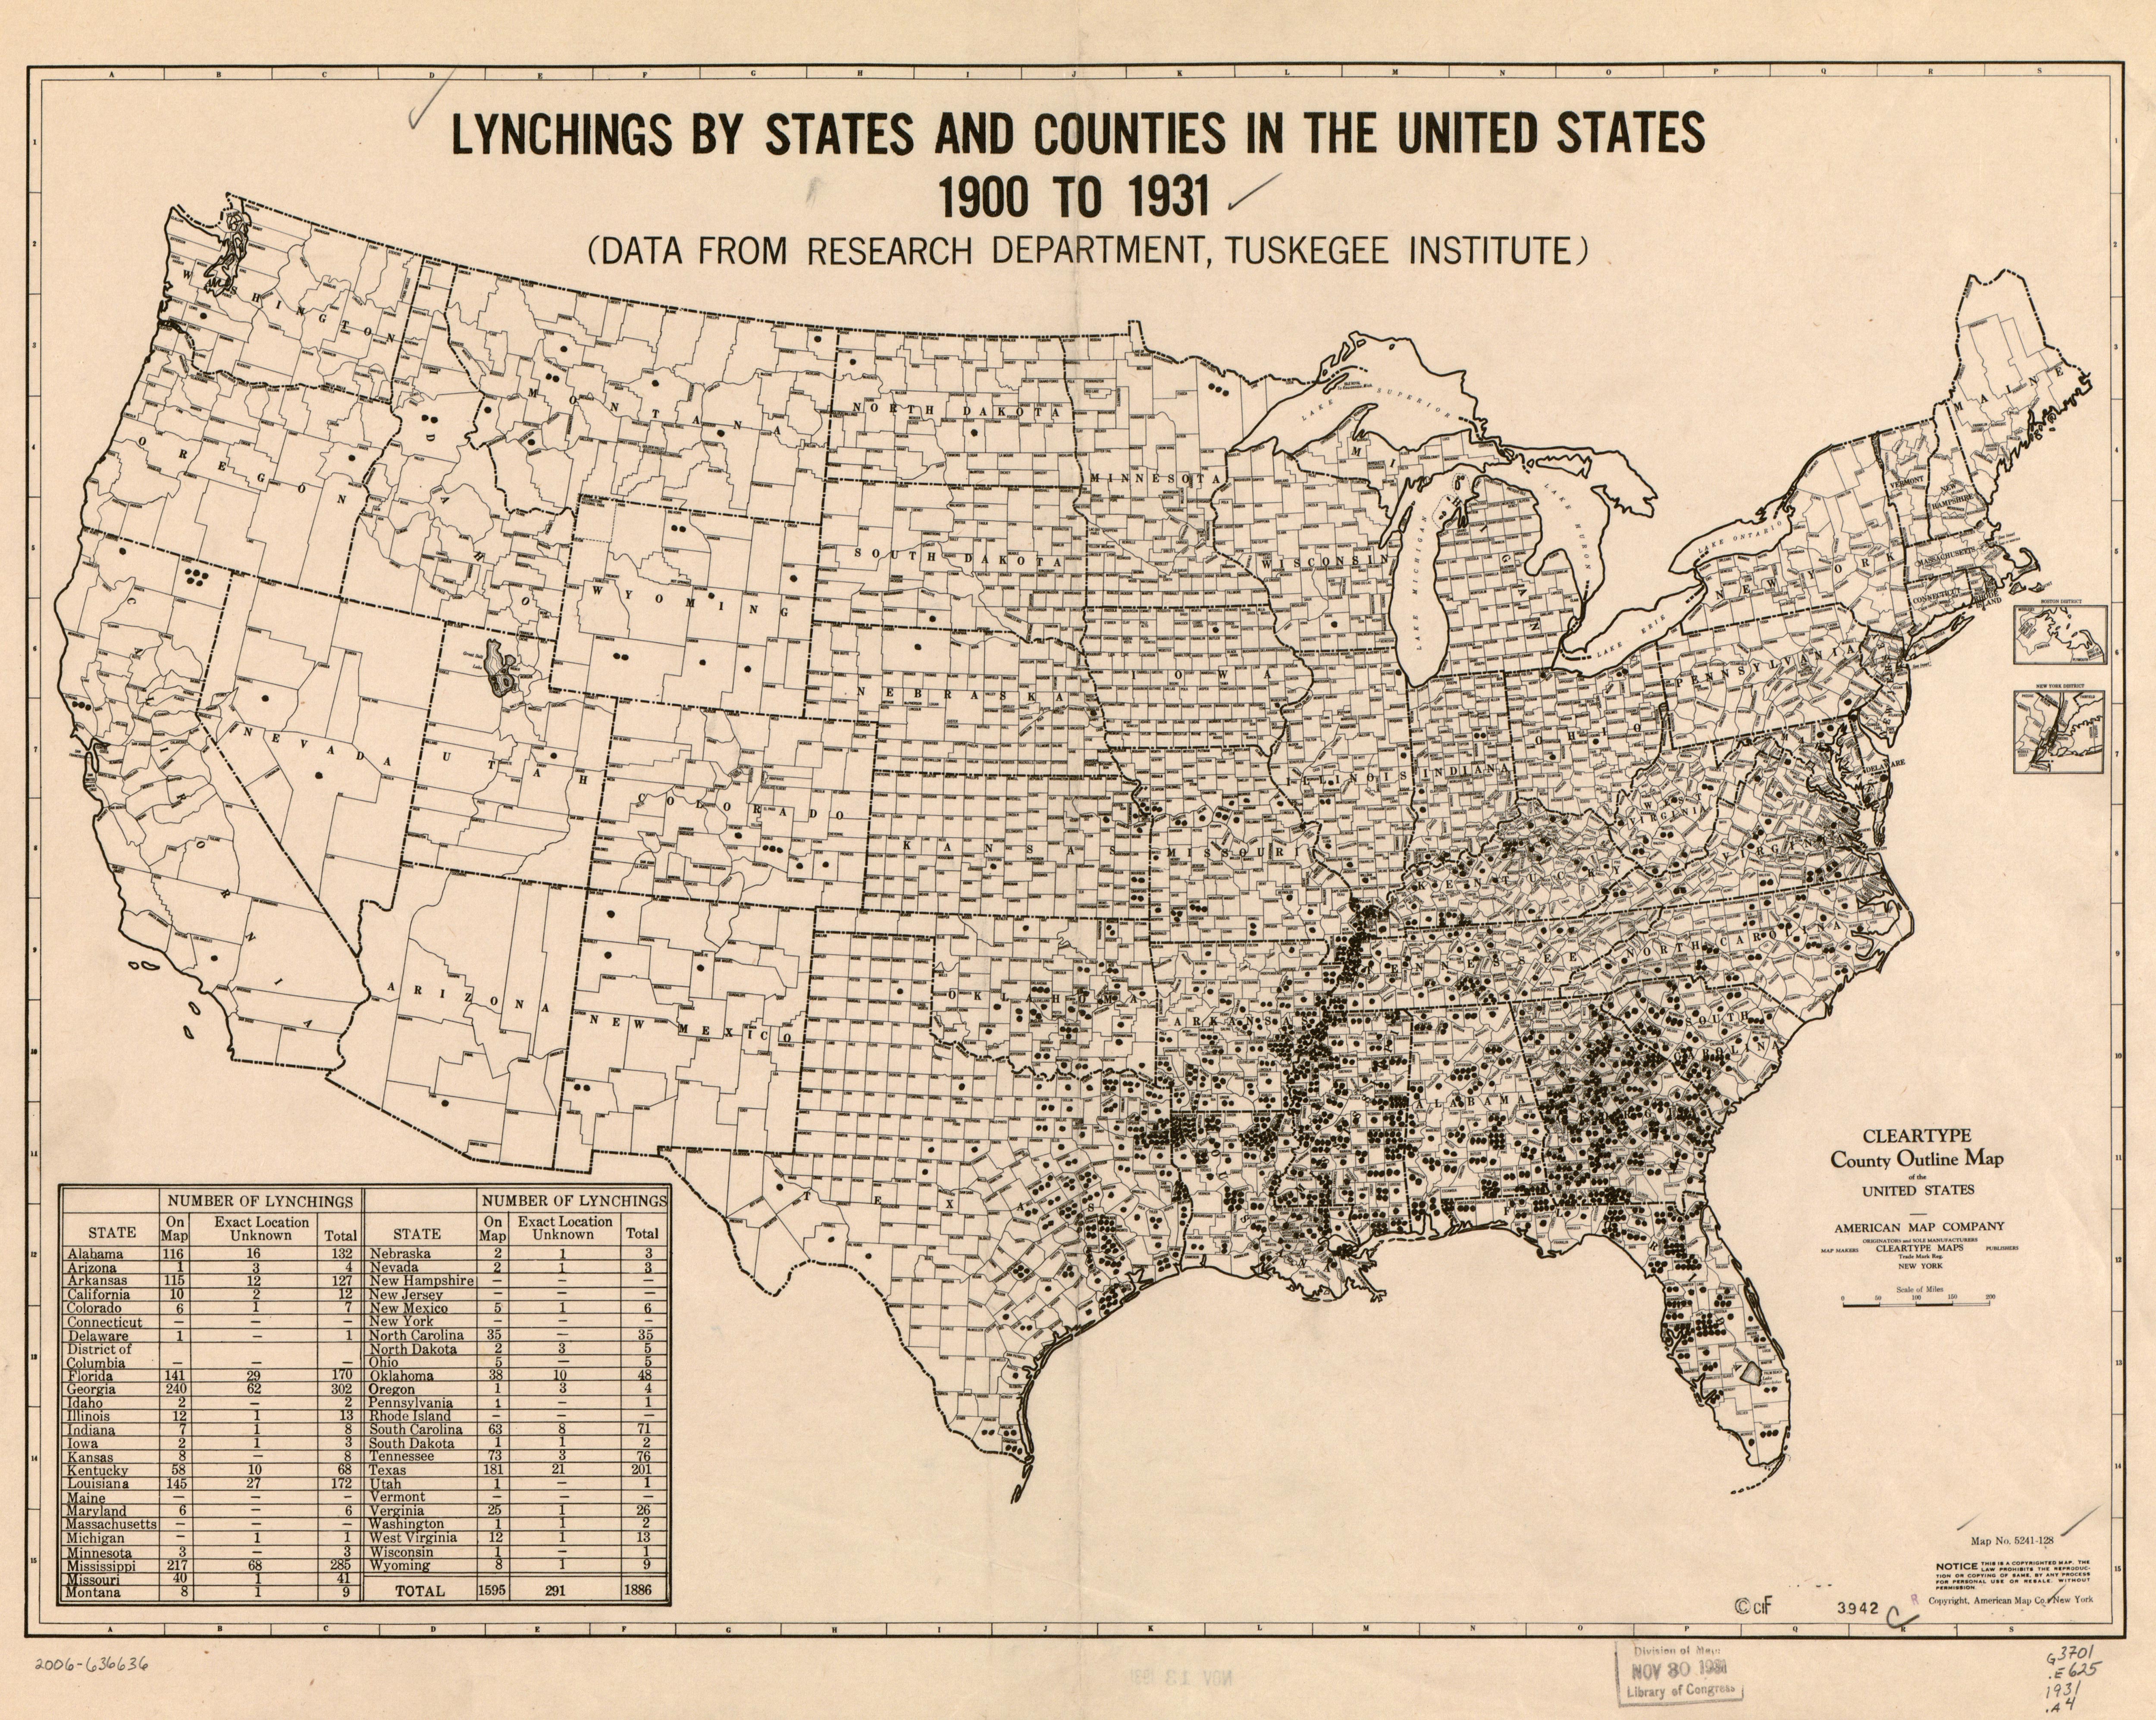 Map of lynchings by states and counties 1900 - 1931 